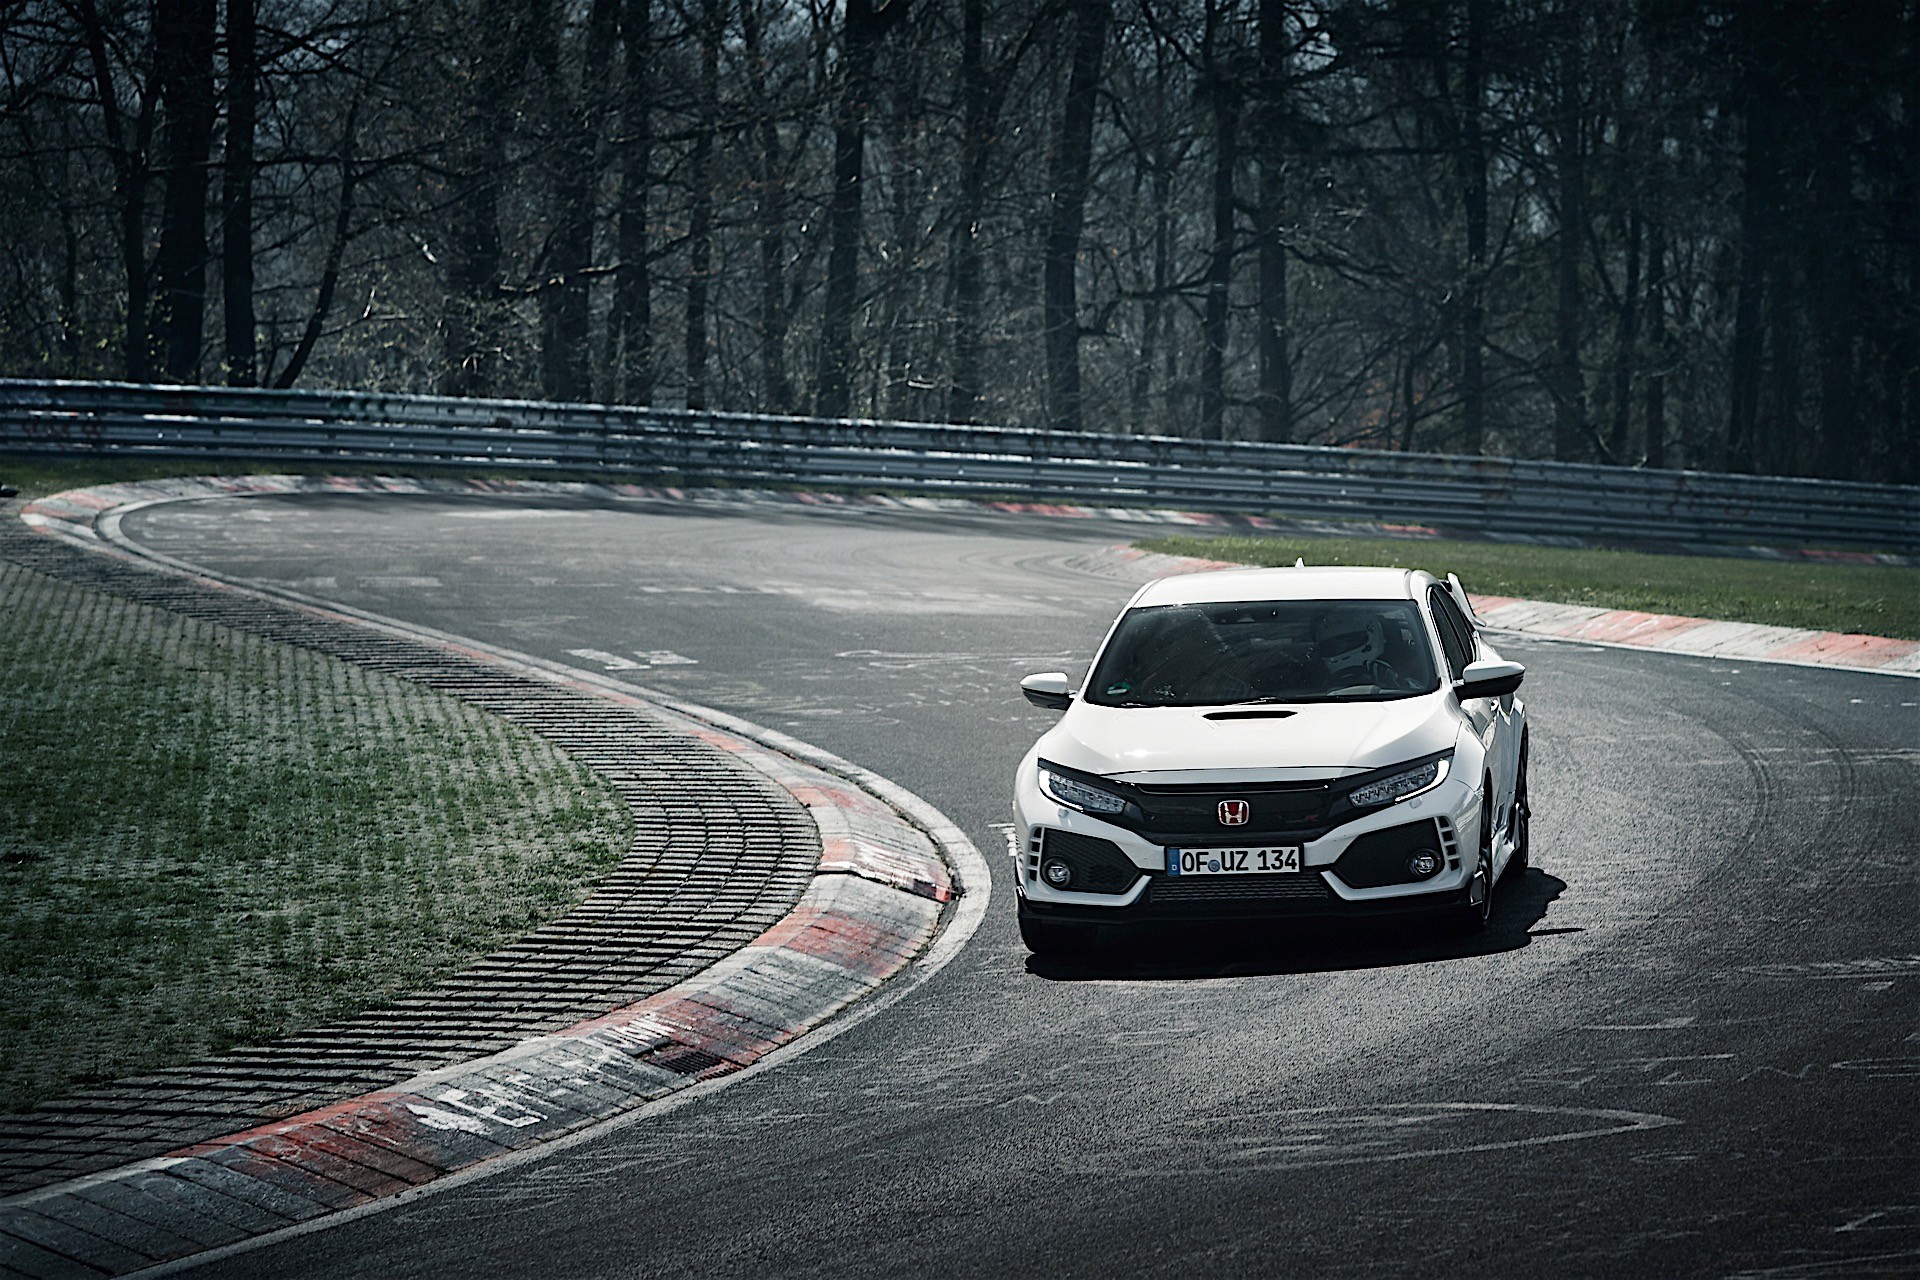 Is Honda planning a Civic Type R with AWD?